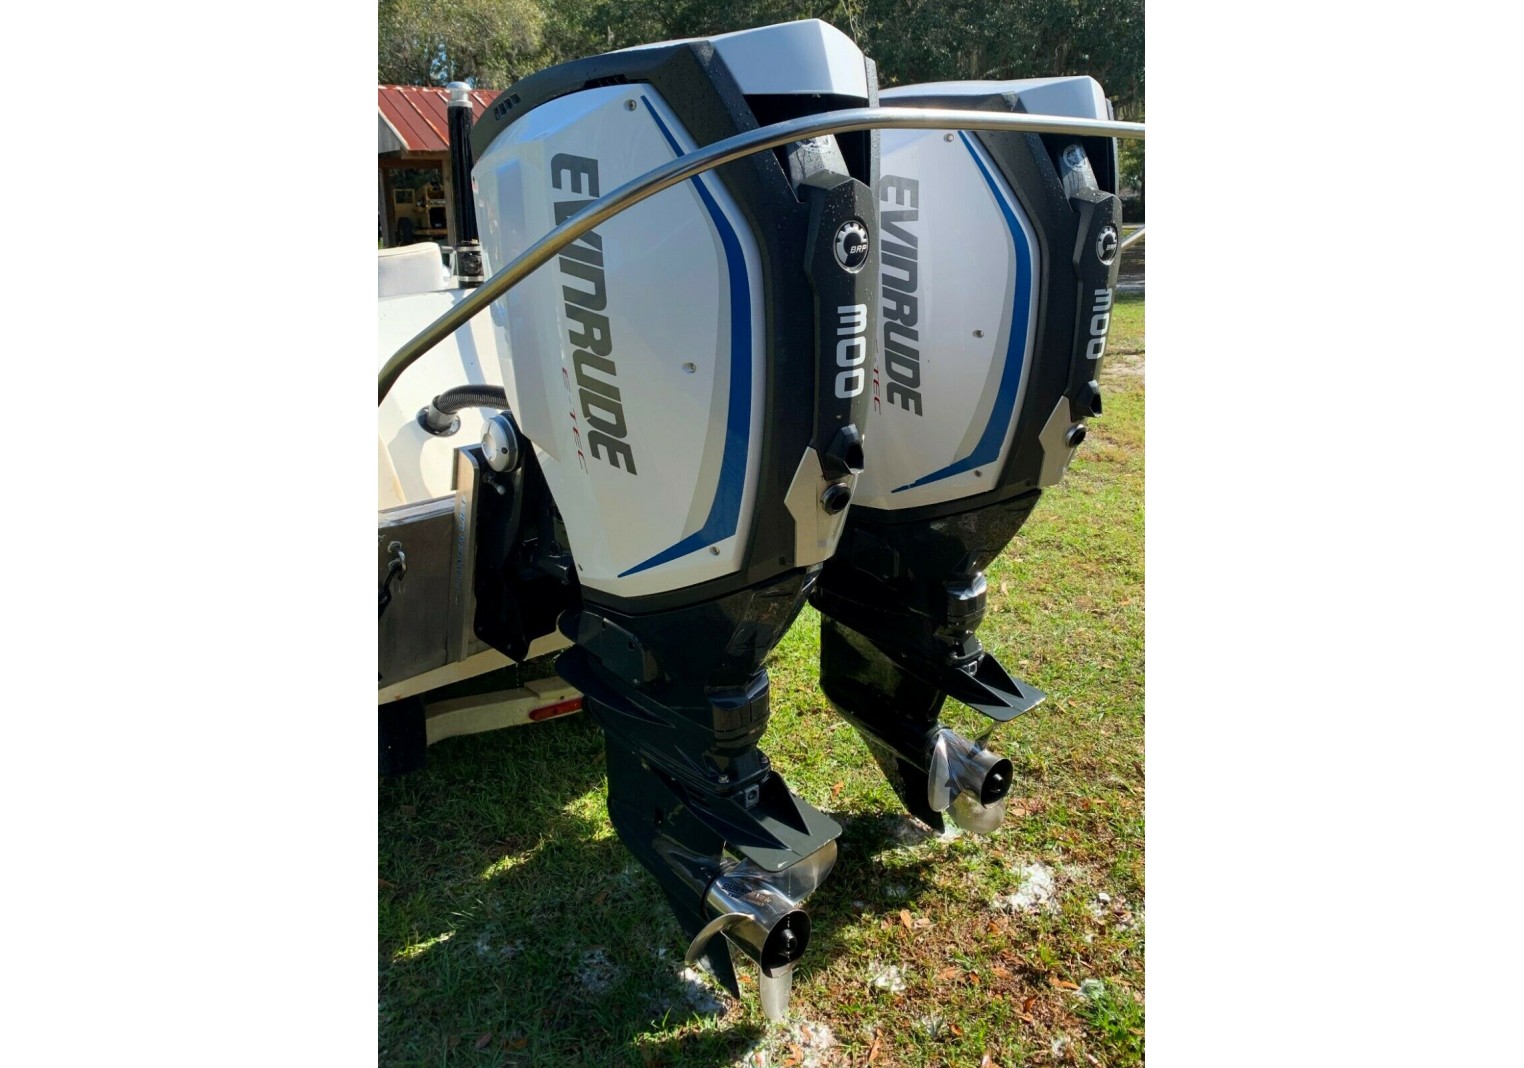 Pair of  Evinrude 300 HP G2 Engines